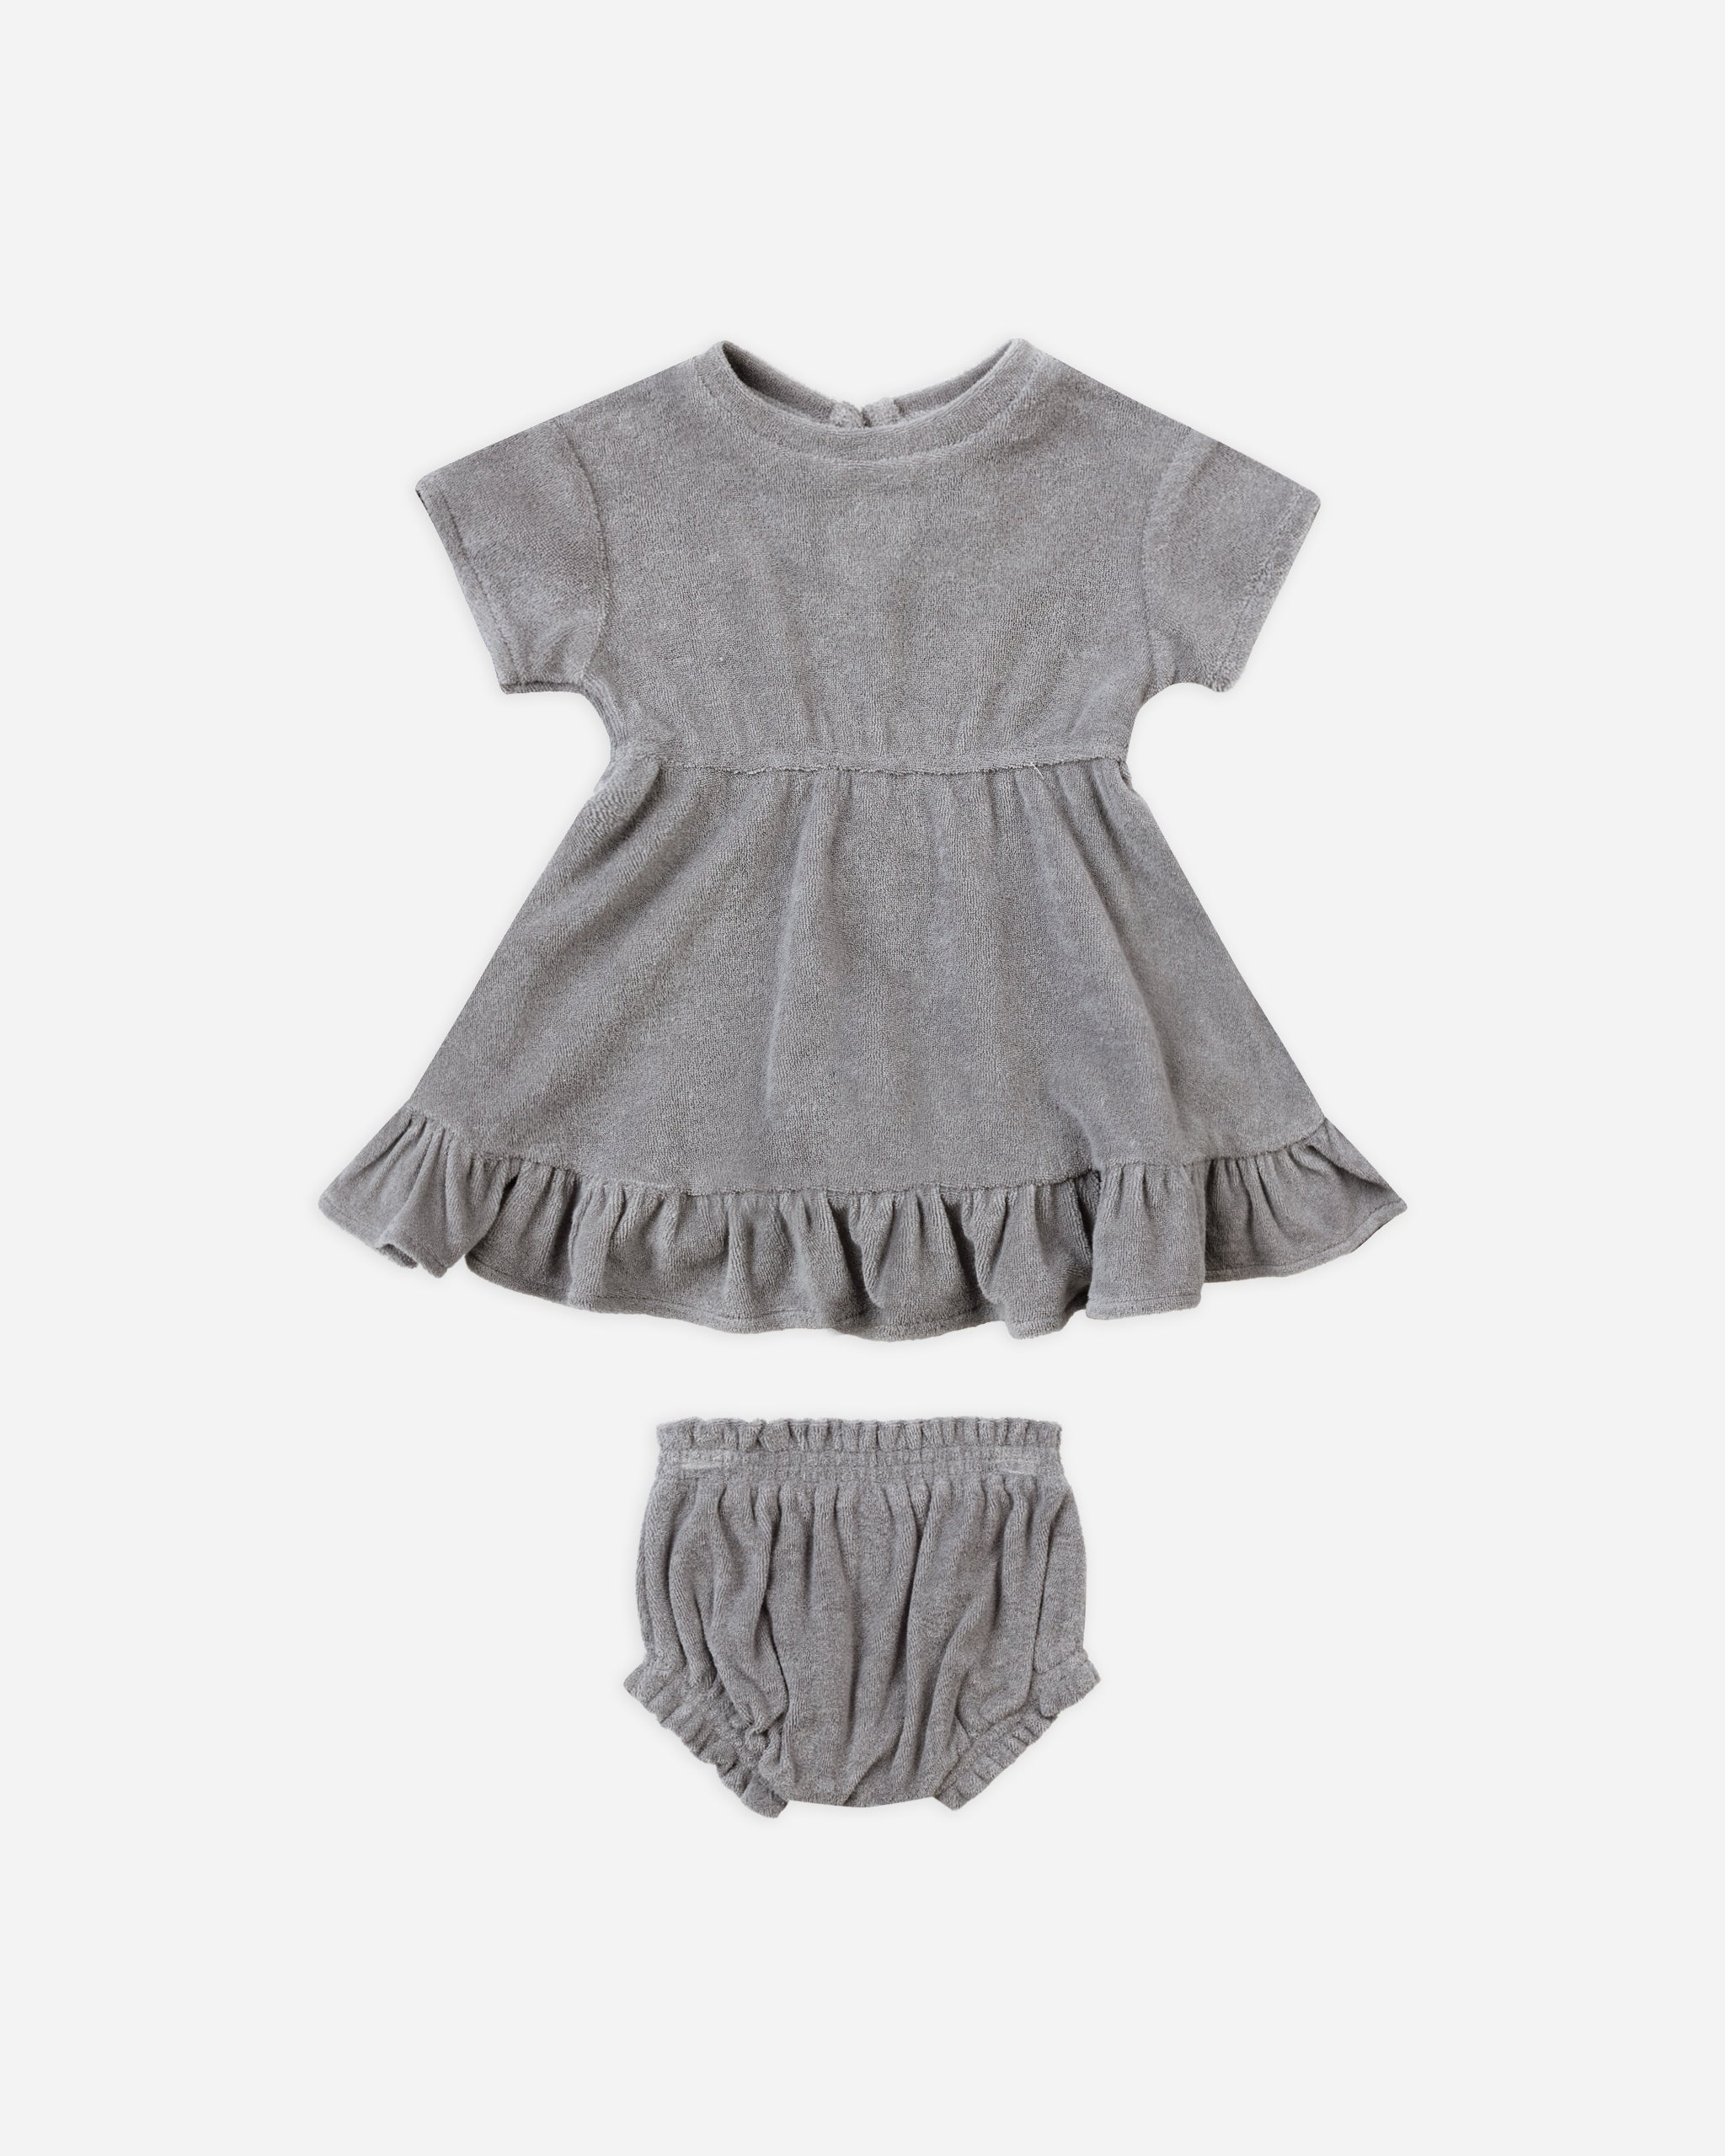 Terry Dress || Lagoon - Rylee + Cru | Kids Clothes | Trendy Baby Clothes | Modern Infant Outfits |